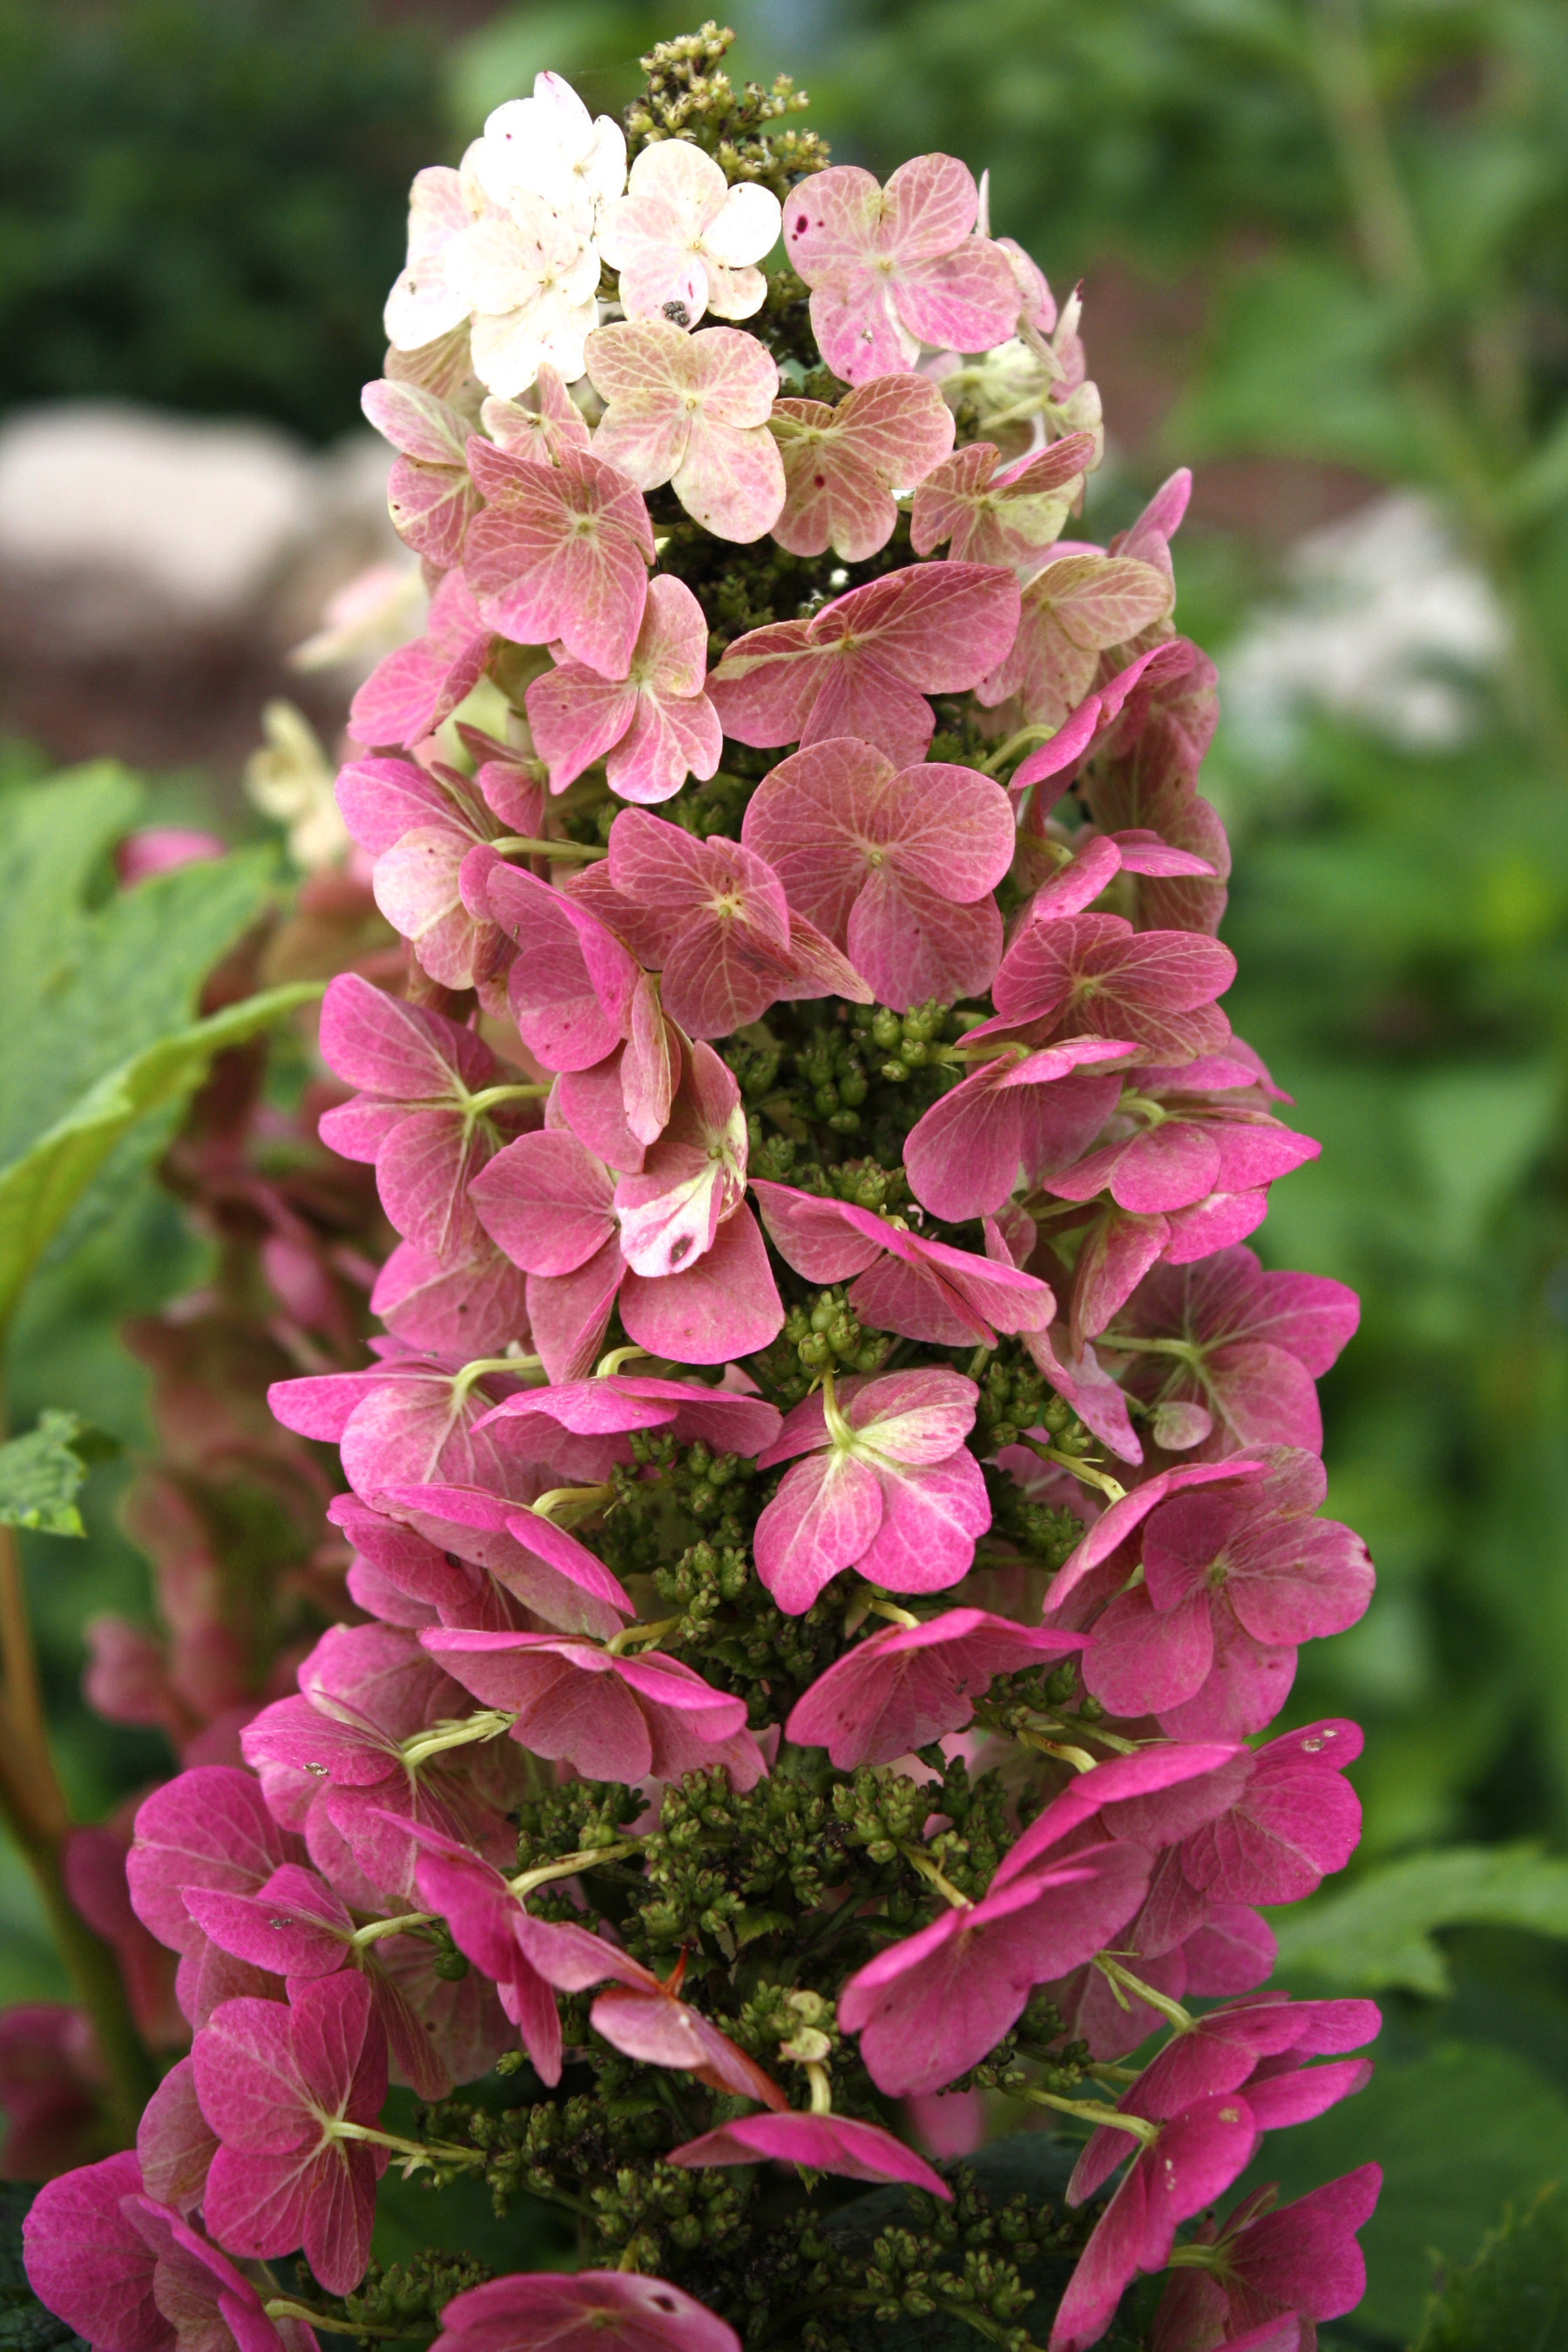 From the First Editions(R) Collection, Jetstream(TM) Oakleaf Hydrangeas provide fantastic autumn color.